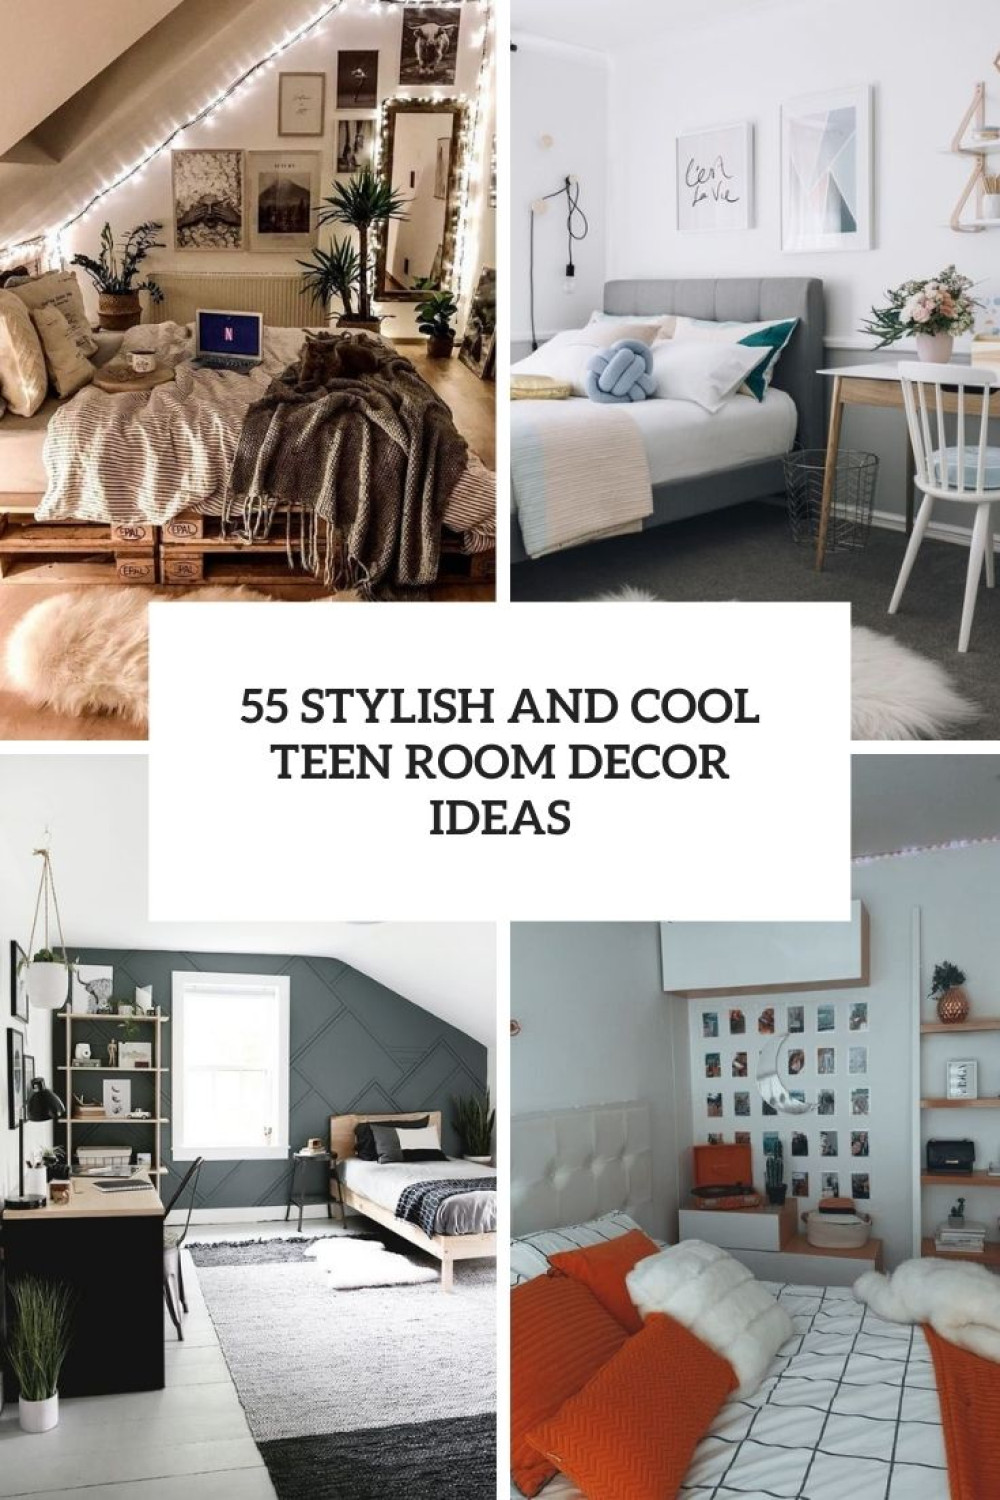 Stylish And Cool Teen Room Decor Ideas - DigsDigs